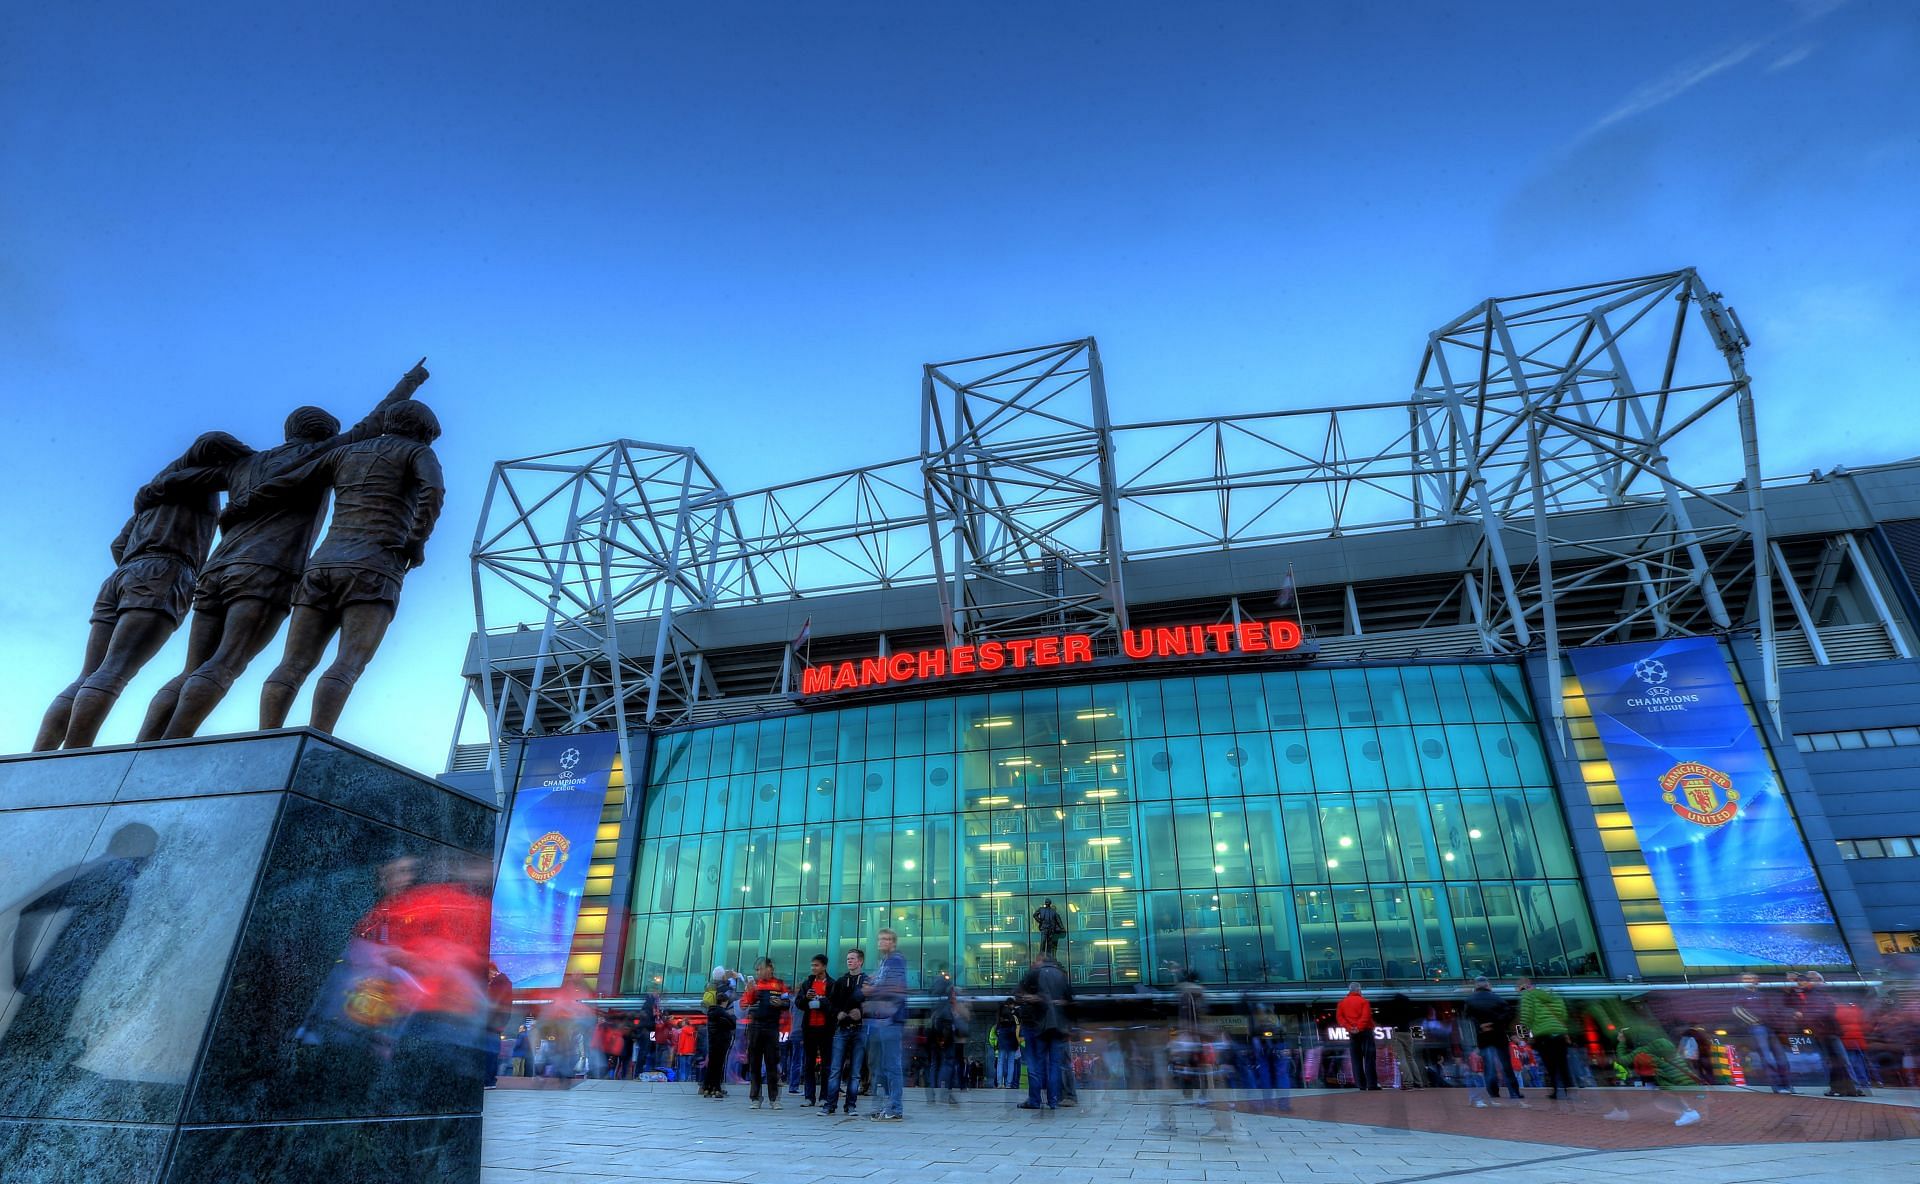 Manchester United continue to dominate English football financially.